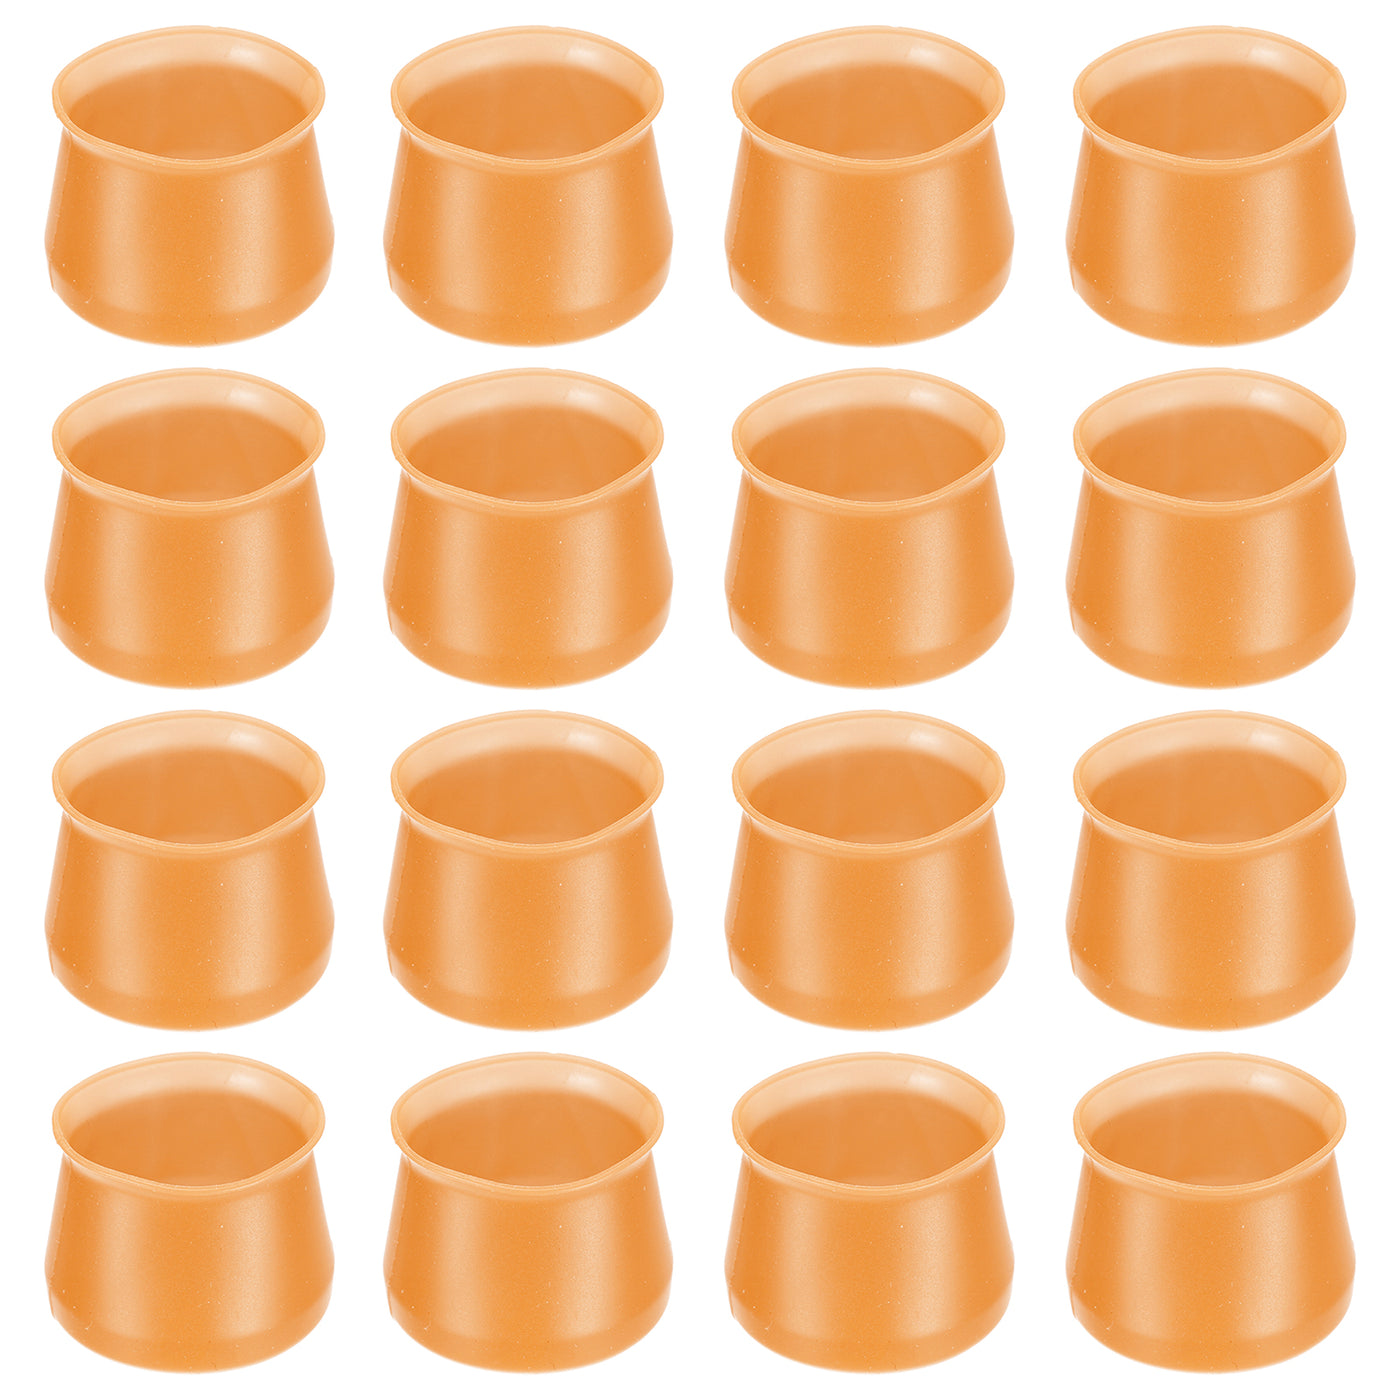 uxcell Uxcell Chair Leg Floor Protectors, 16Pcs 38mm/ 1.5" Silicone Chair Leg Cover Caps for Hardwood Floors (Brown)